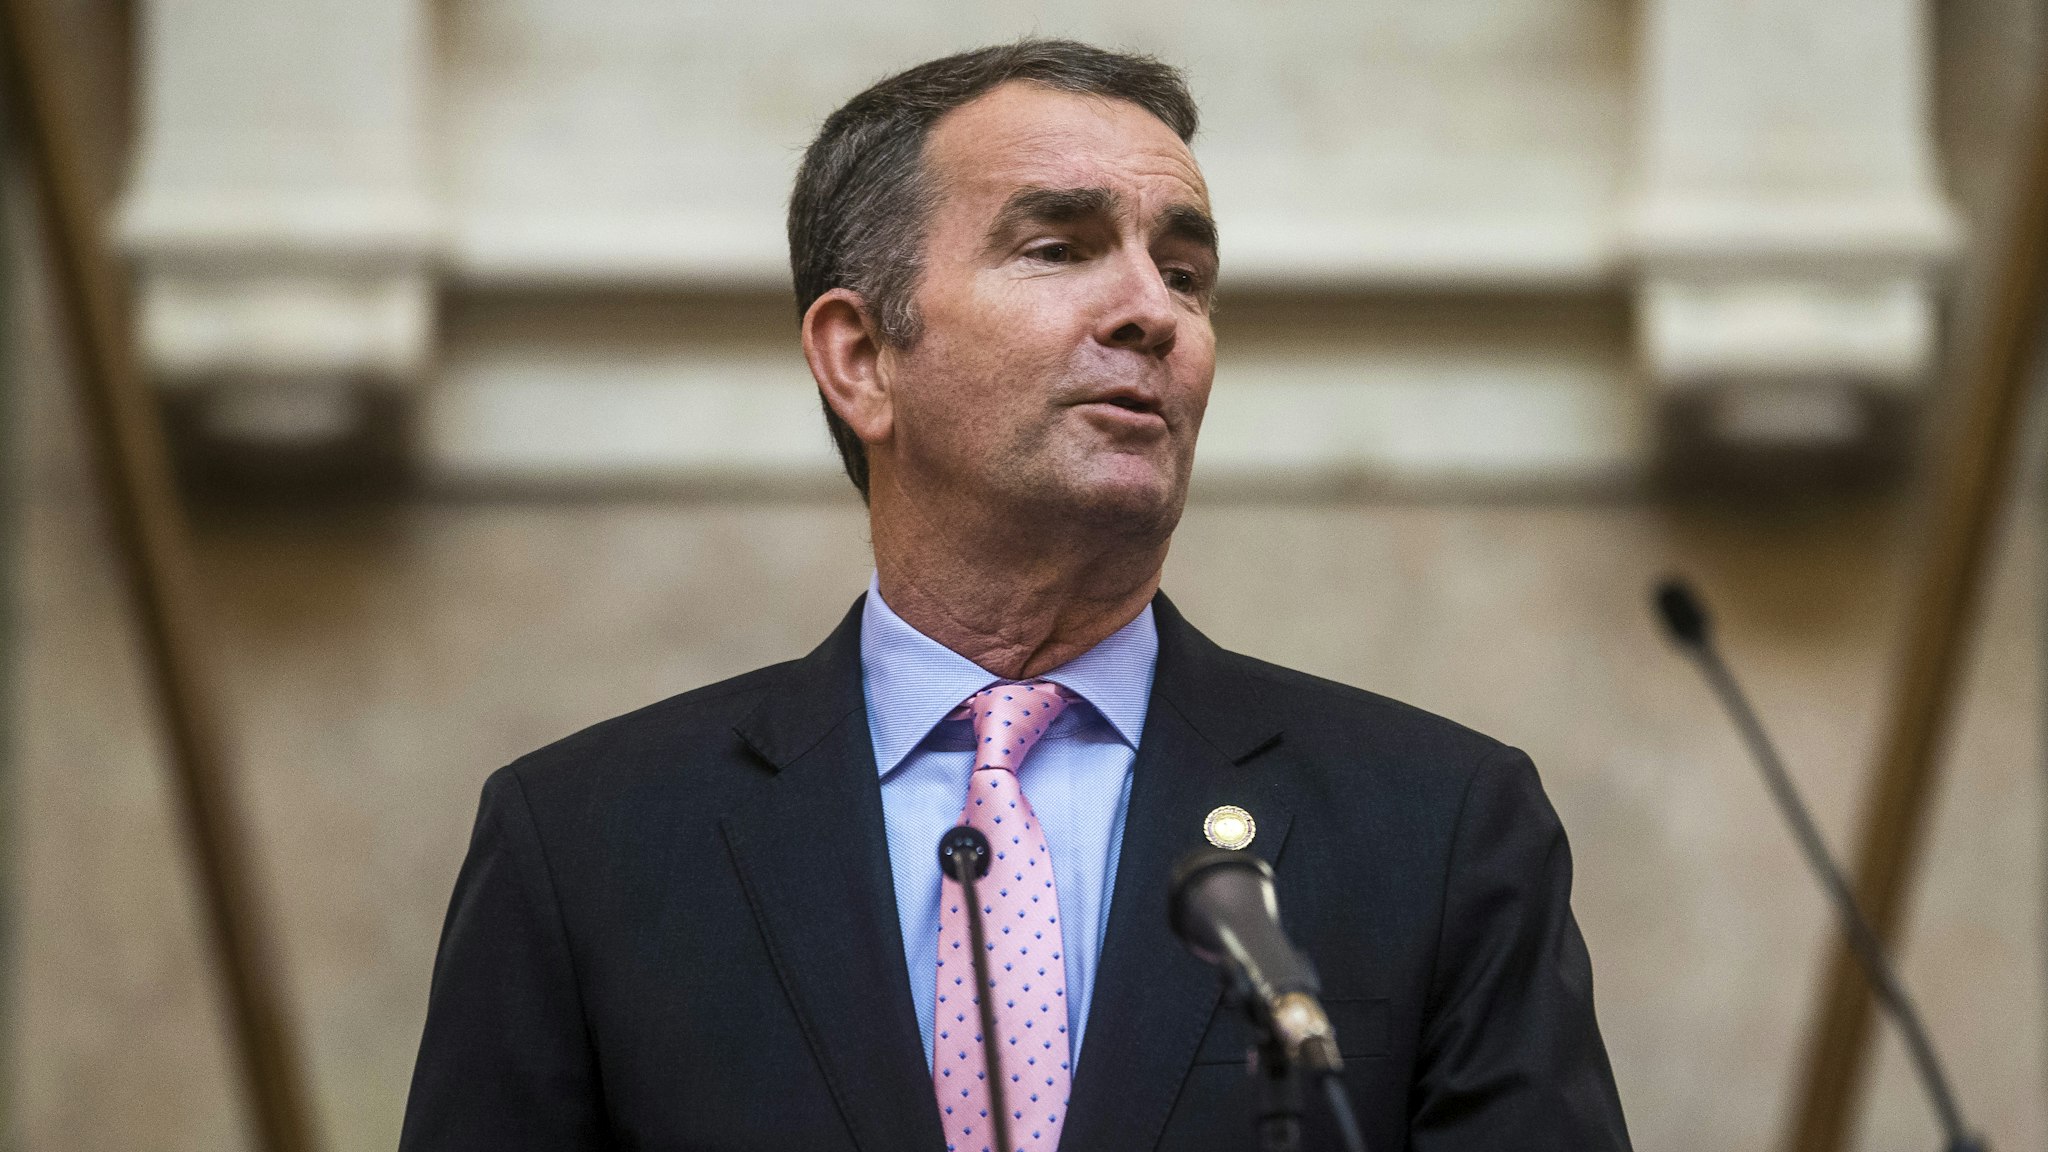 RICHMOND, VA - JANUARY 08: Gov. Ralph Northam delivers the State of the Commonwealth address at the Virginia State Capitol on January 8, 2020 in Richmond, Virginia. The 2020 legislative session began today under Democratic control.